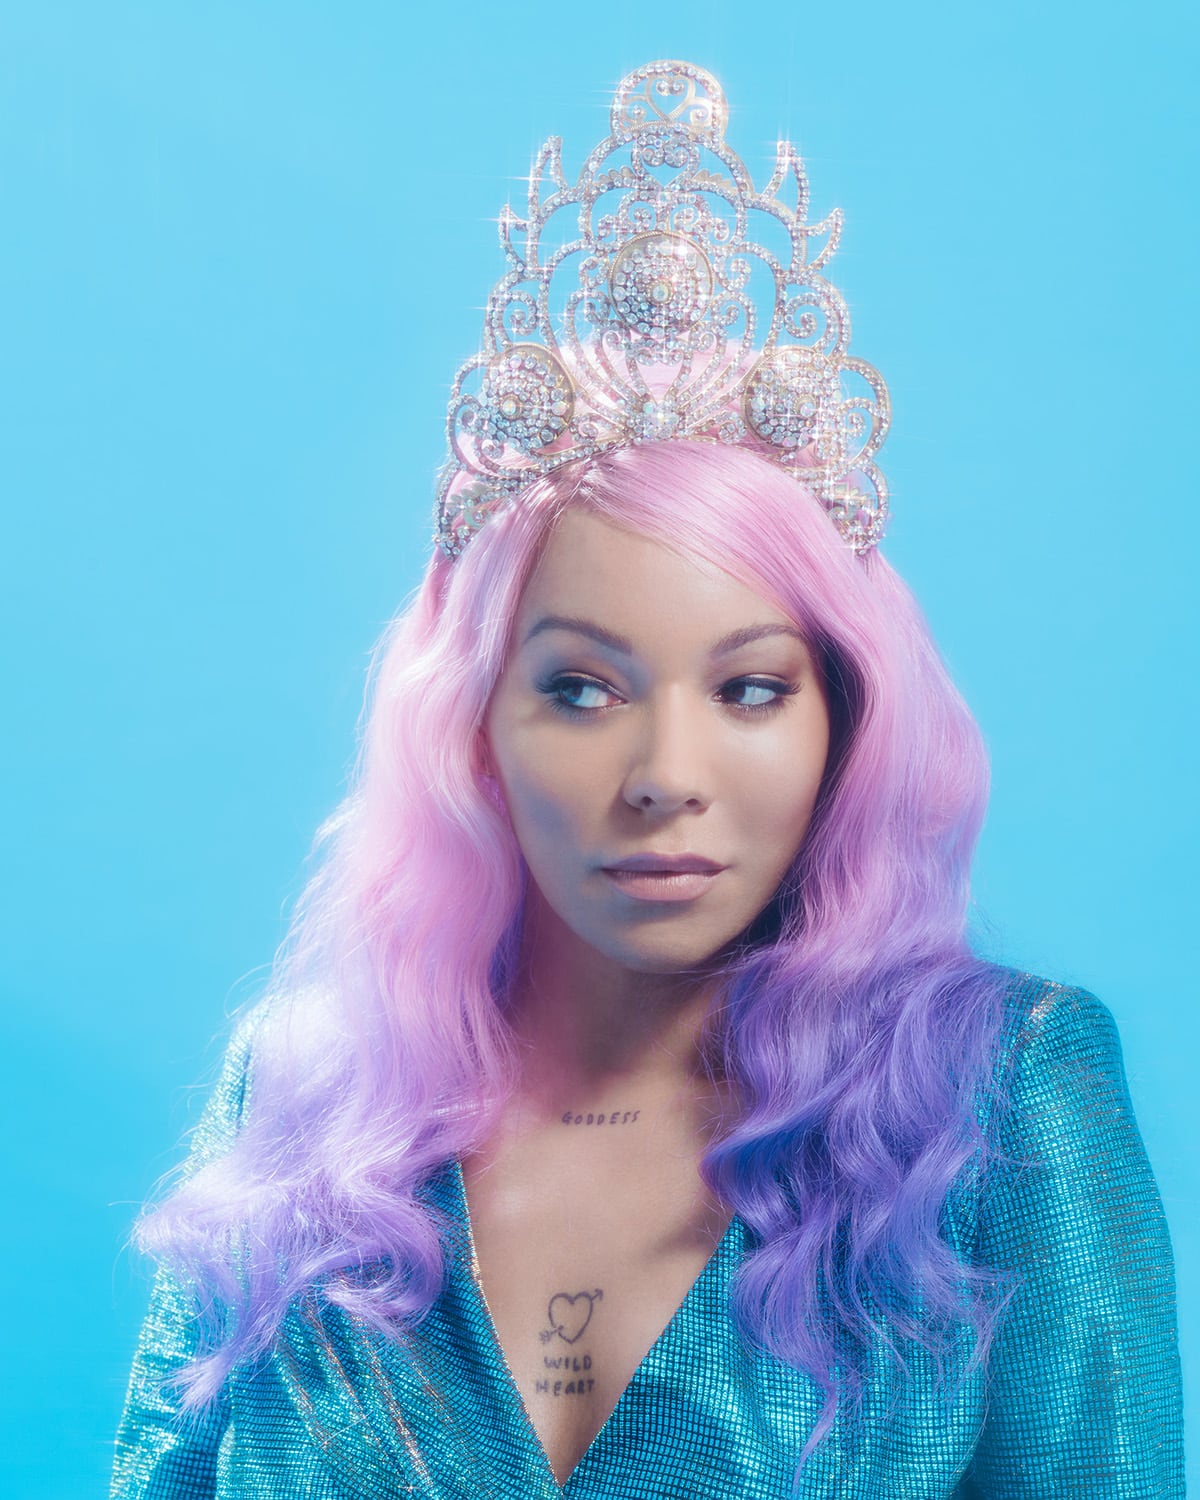 Soft vintage portrait photography of trans activist Munroe Bergdorf by London portrait photographer Ira Giorgetti